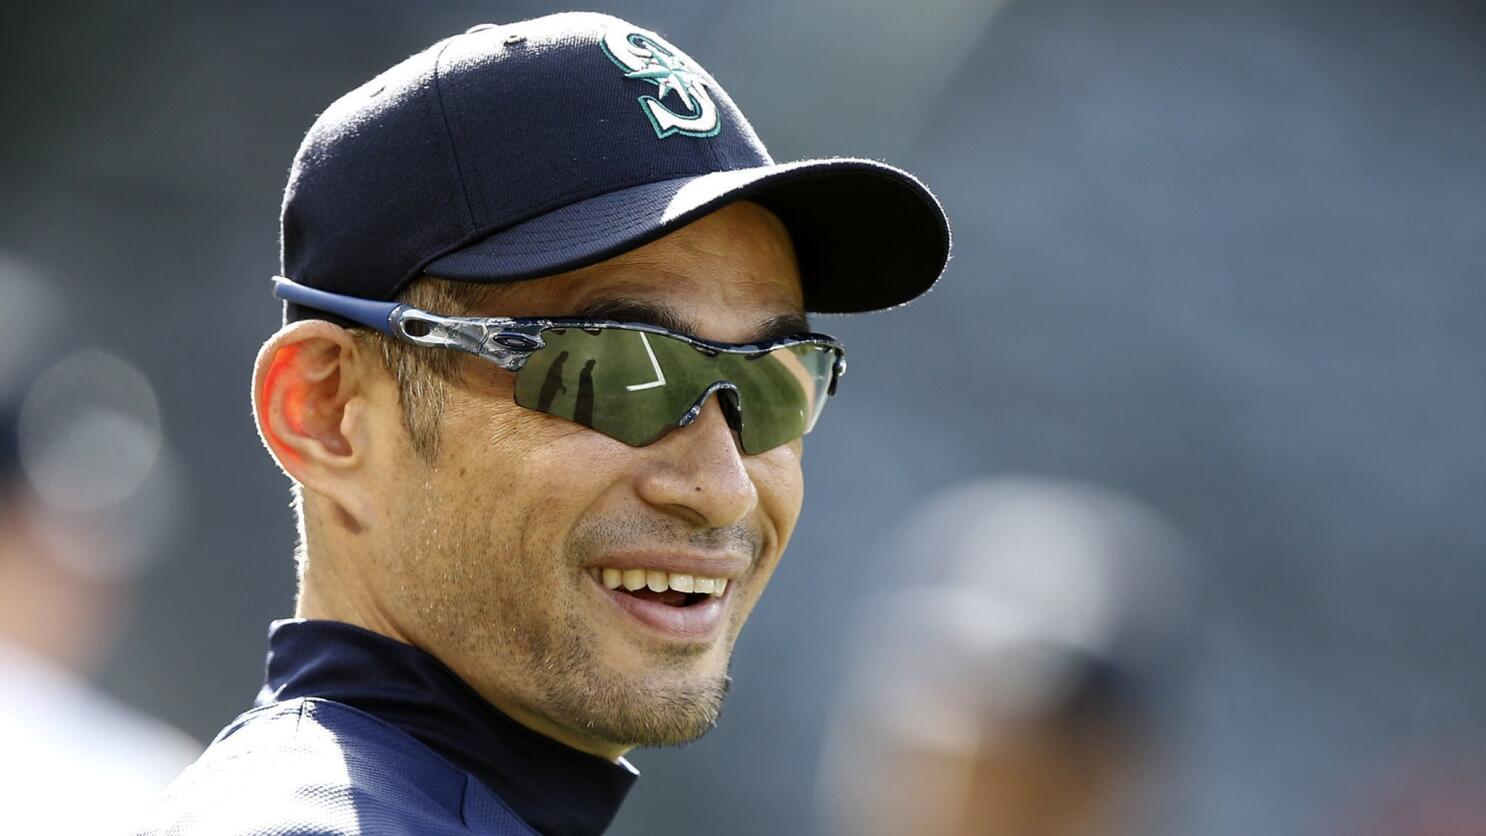 Mariners Agree to Terms with Outfielder Ichiro Suzuki, by Mariners PR